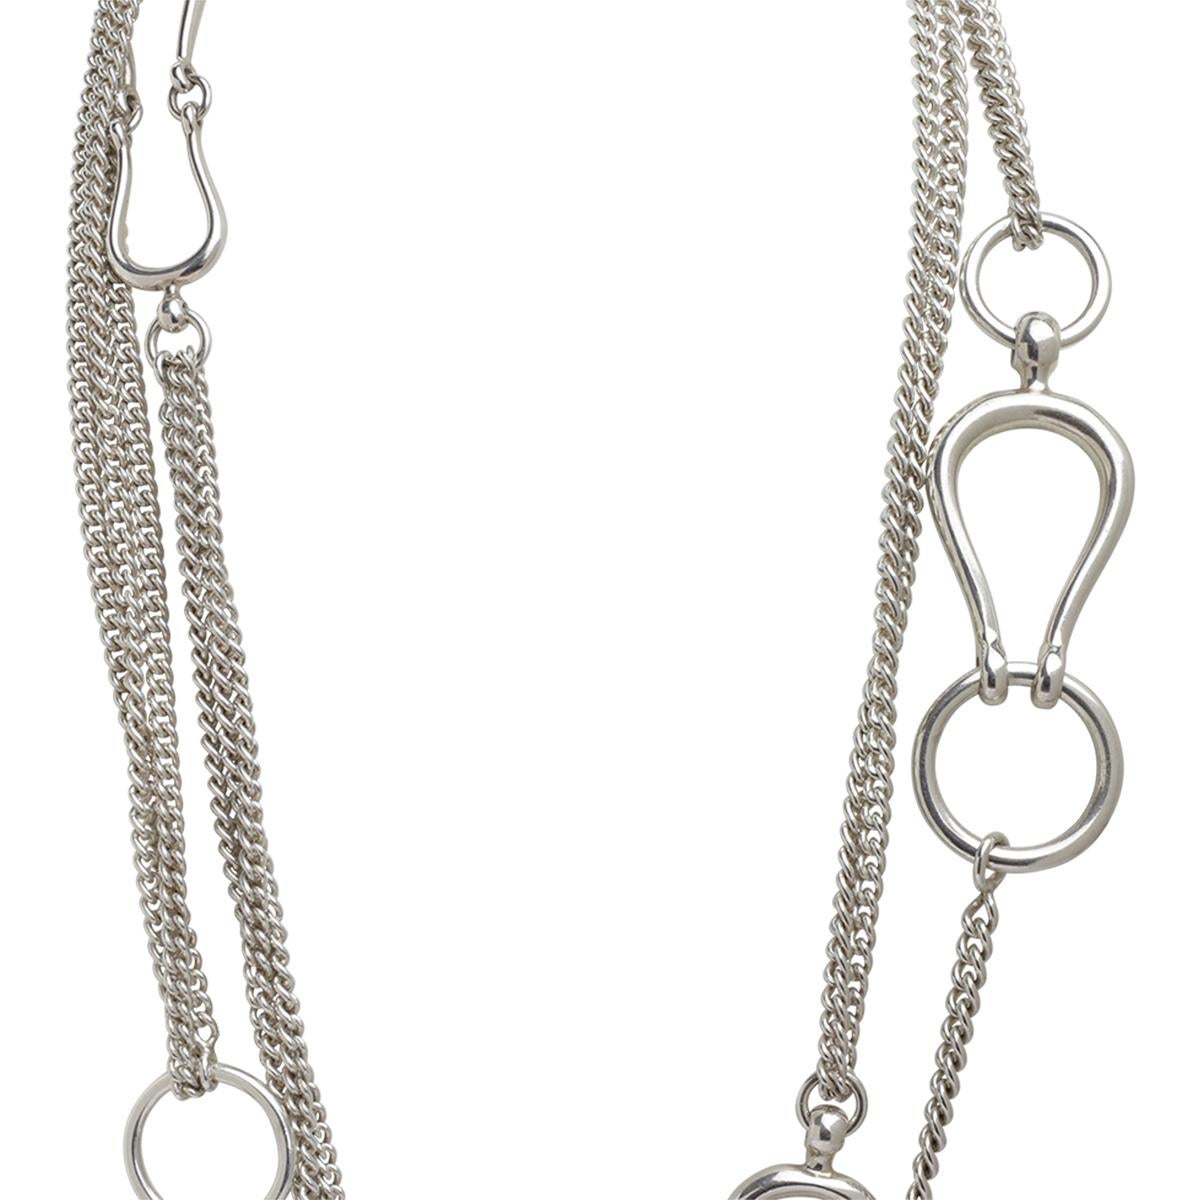 Hermes, always stylish and chic. This fabulous Sterling Silver 925 Hermes Horsebit chain necklace is classic and so wearable. Can be worn full length or doubled around the neck for a very glamorous feel. Very collectible and a perfect addition to